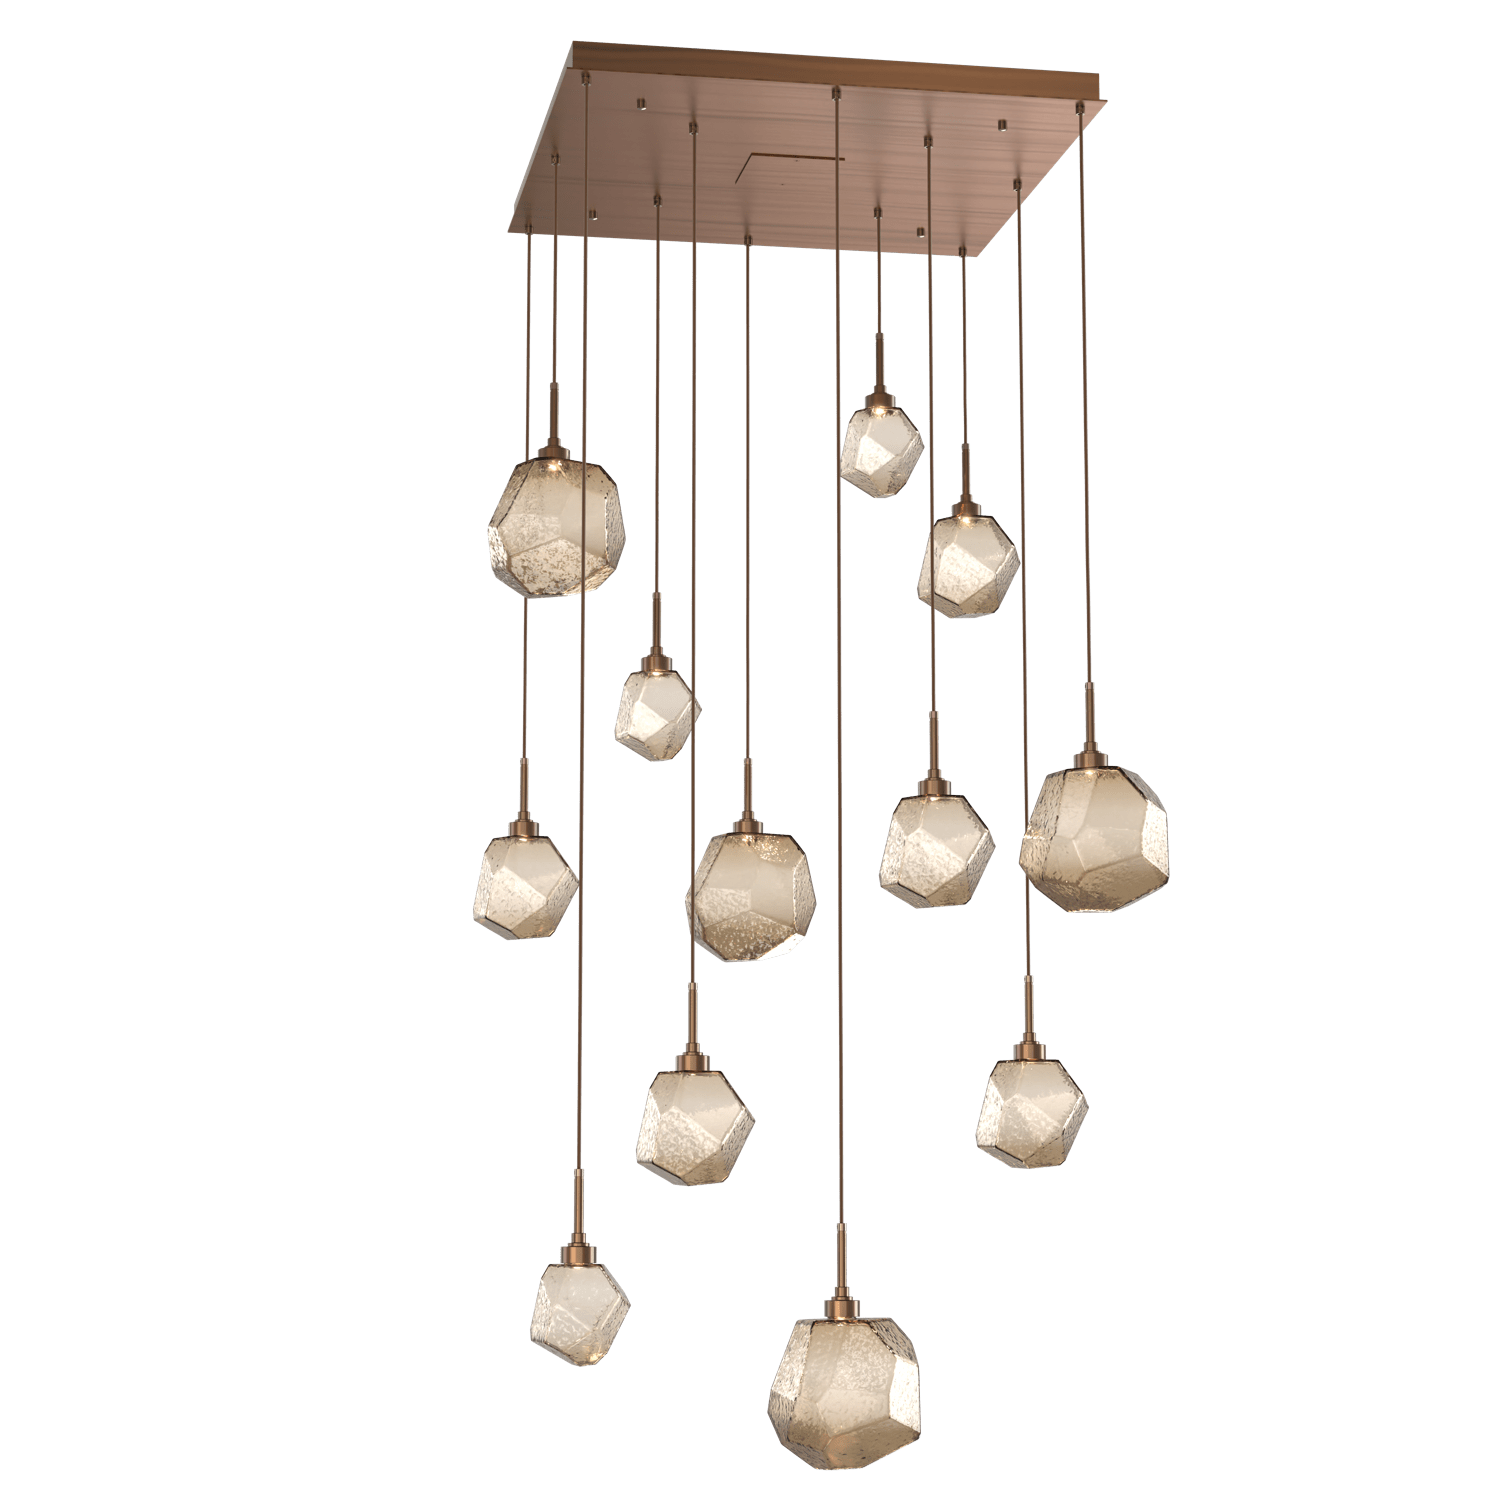 CHB0039-12-RB-B-Hammerton-Studio-Gem-12-light-square-pendant-chandelier-with-oil-rubbed-bronze-finish-and-bronze-blown-glass-shades-and-LED-lamping